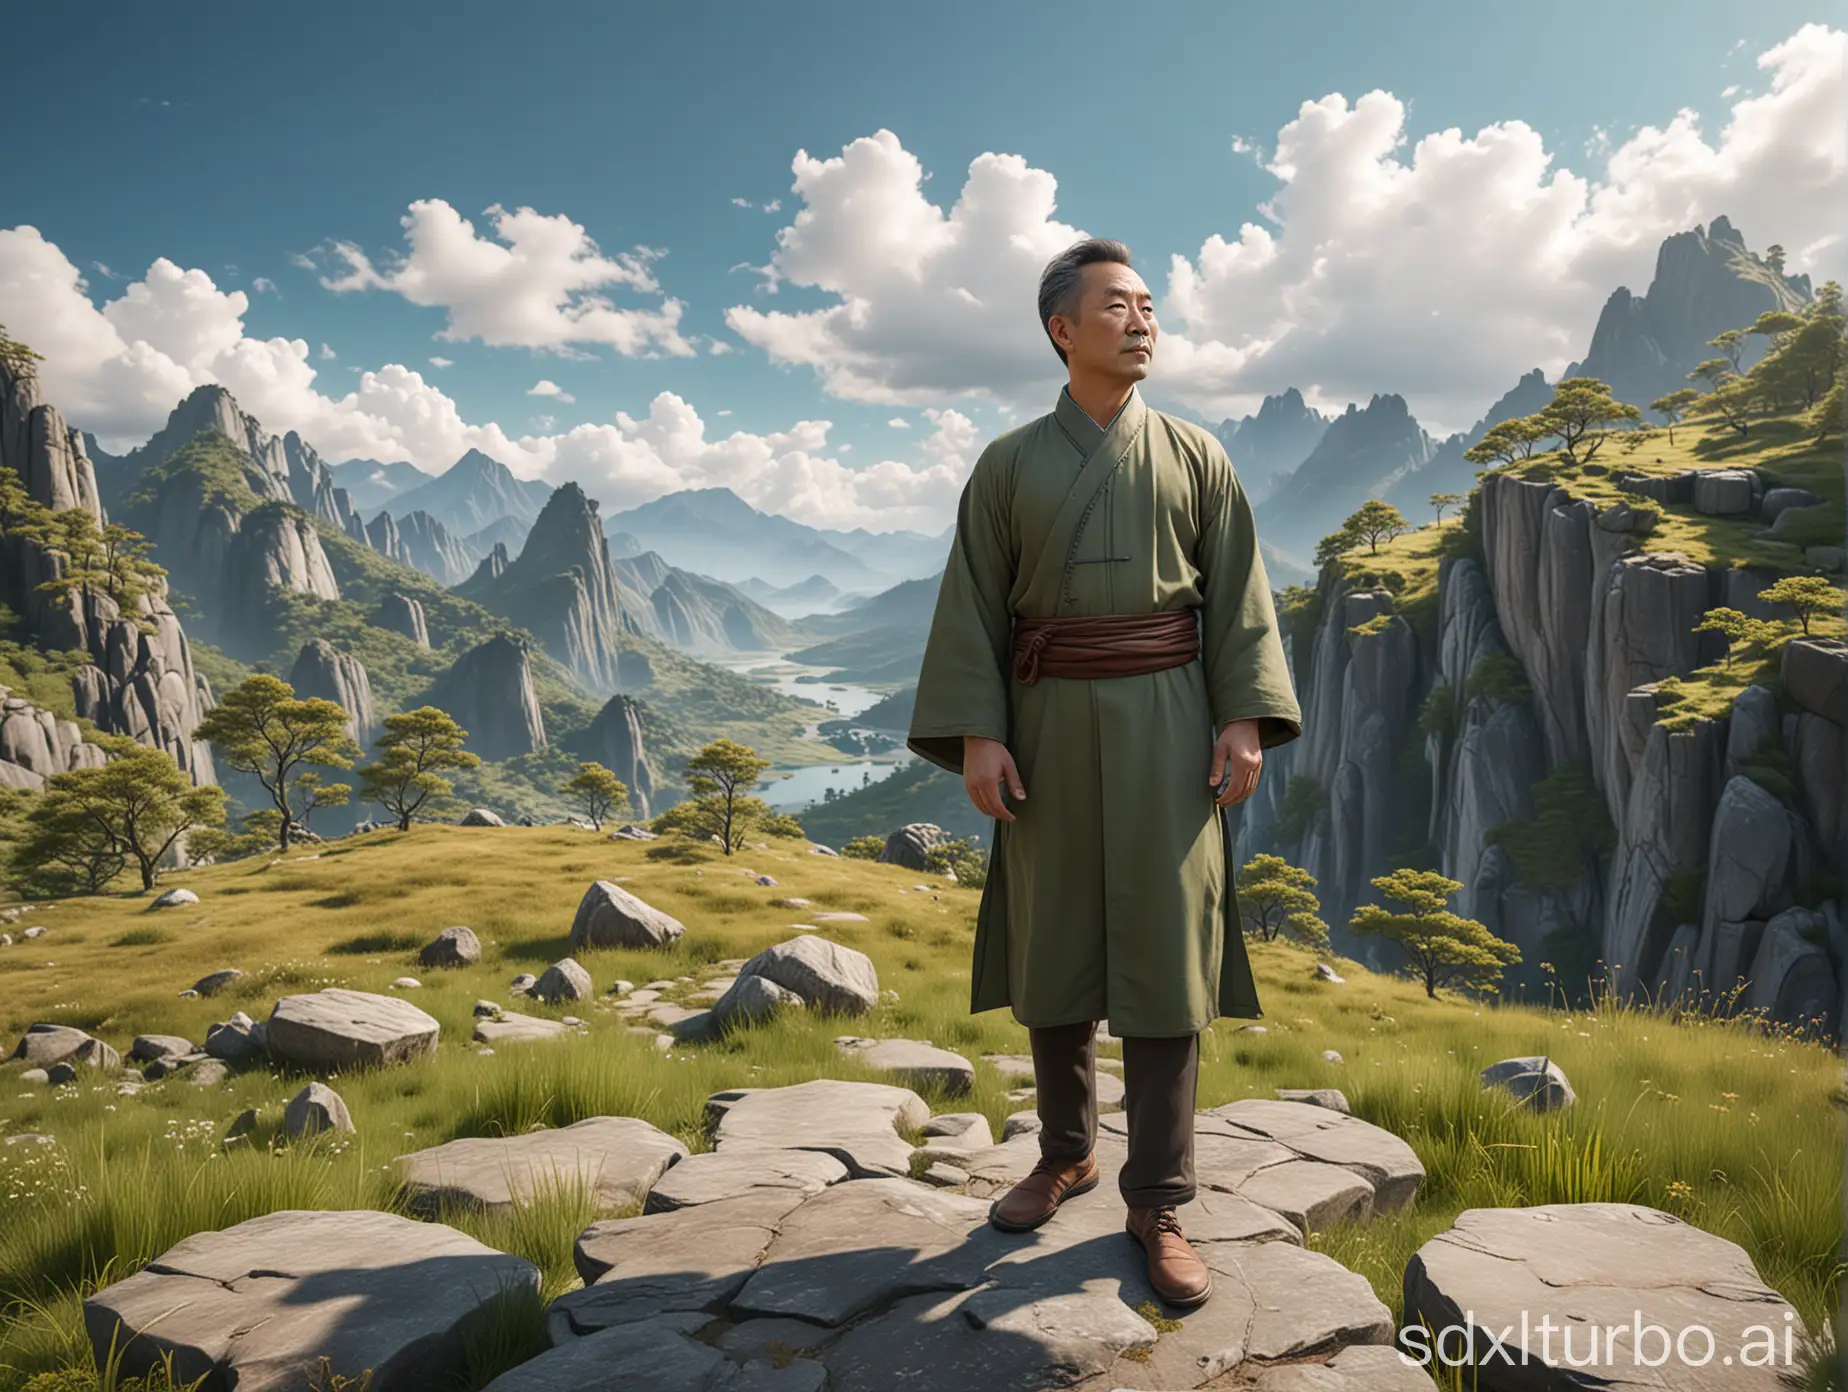 In view, looking down, a middle-aged man, full body, high-quality skin, delicate face, mature, Chinese-style clothing, first-person perspective, standing, on the mountain, moss stone platform, natural light, daytime, sky, white clouds, sun, green grass, trees, lakes, 3D, VR rendering, oriental style, scenery, masterpiece, best picture quality, 8K picture quality, ultra-high resolution, cinematic atmosphere, surreal, aesthetics.